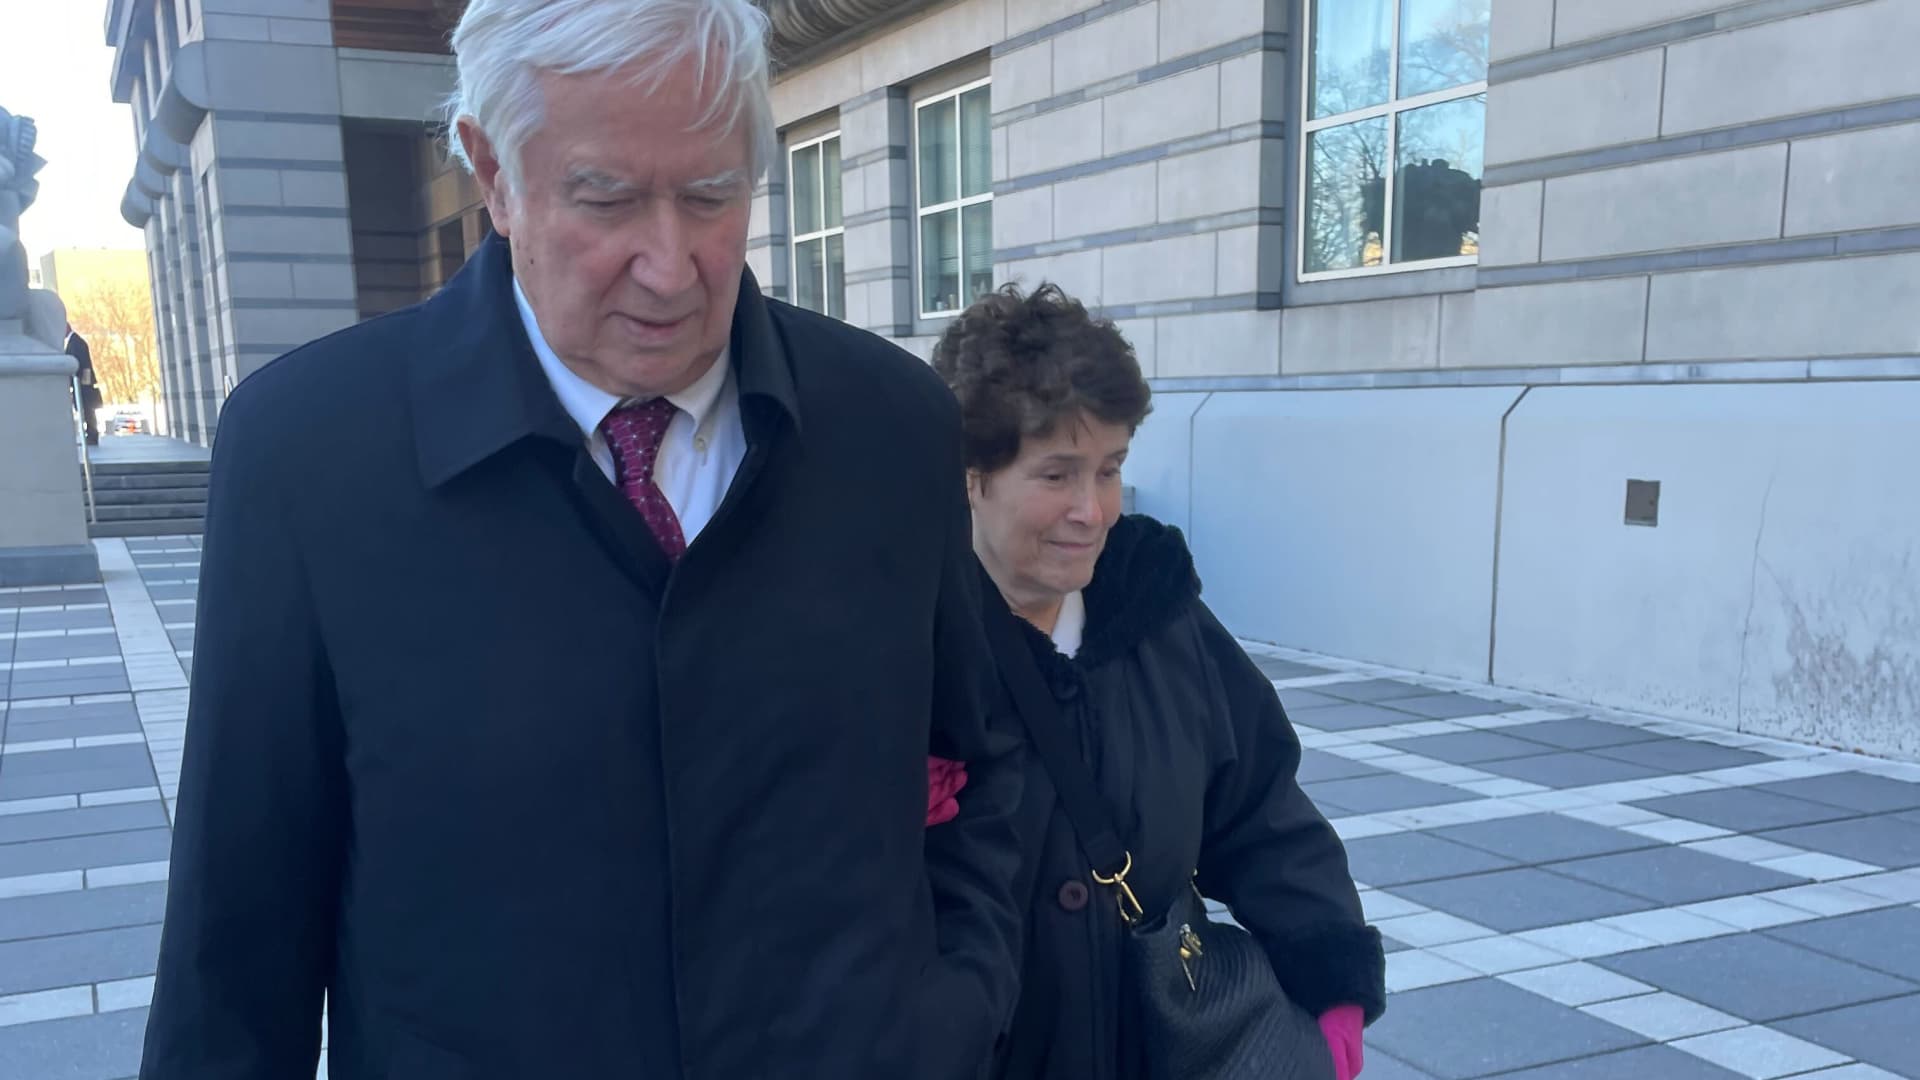 Peter Coker Sr. and his wife Susan Coker at U.S. District Court in Newark, New Jersey, March 15, 2023.